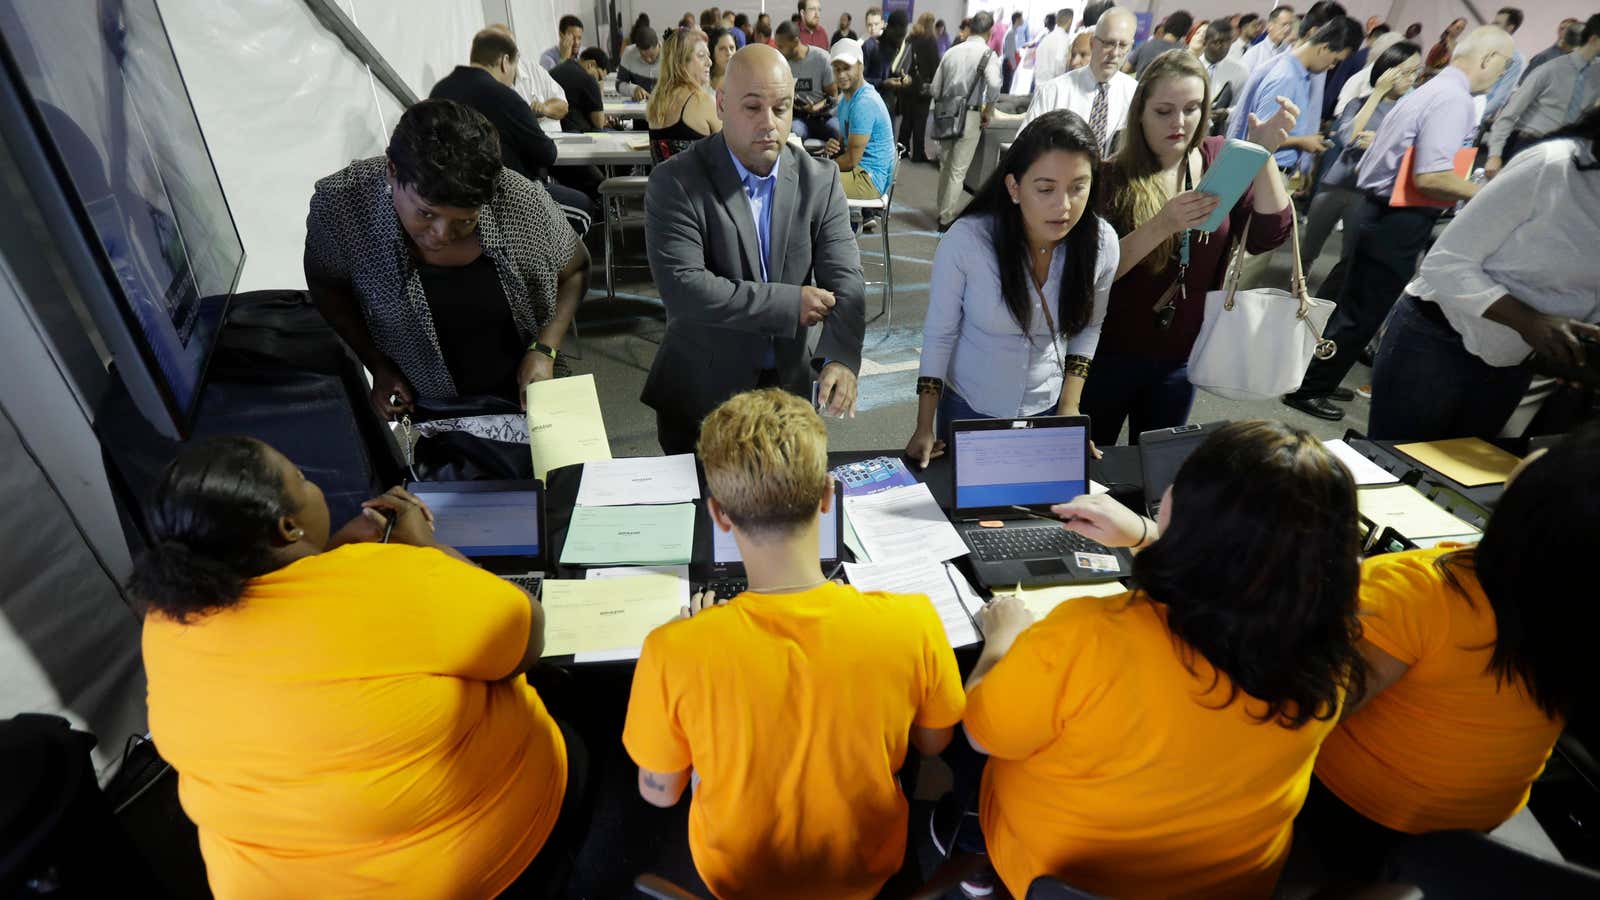 Job candidates are processed during a job fair at an Amazon Fulfillment center.